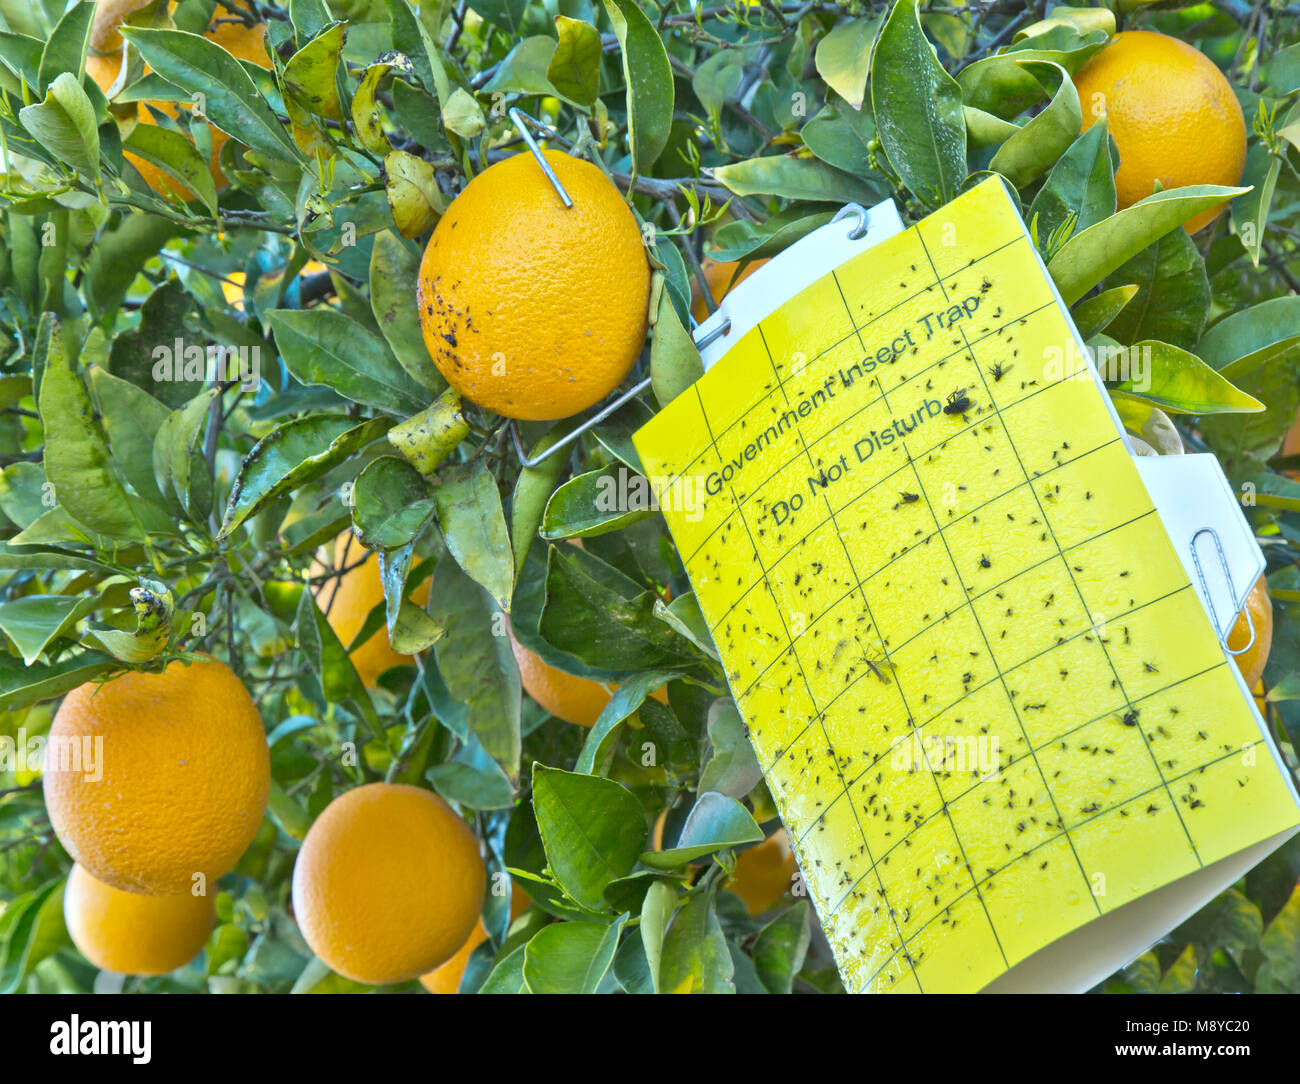 Agricultural Insect Trap 'Do not disturb', Cutter nucellar Valencia Oranges 'Citrus sinensis'. Stock Photo